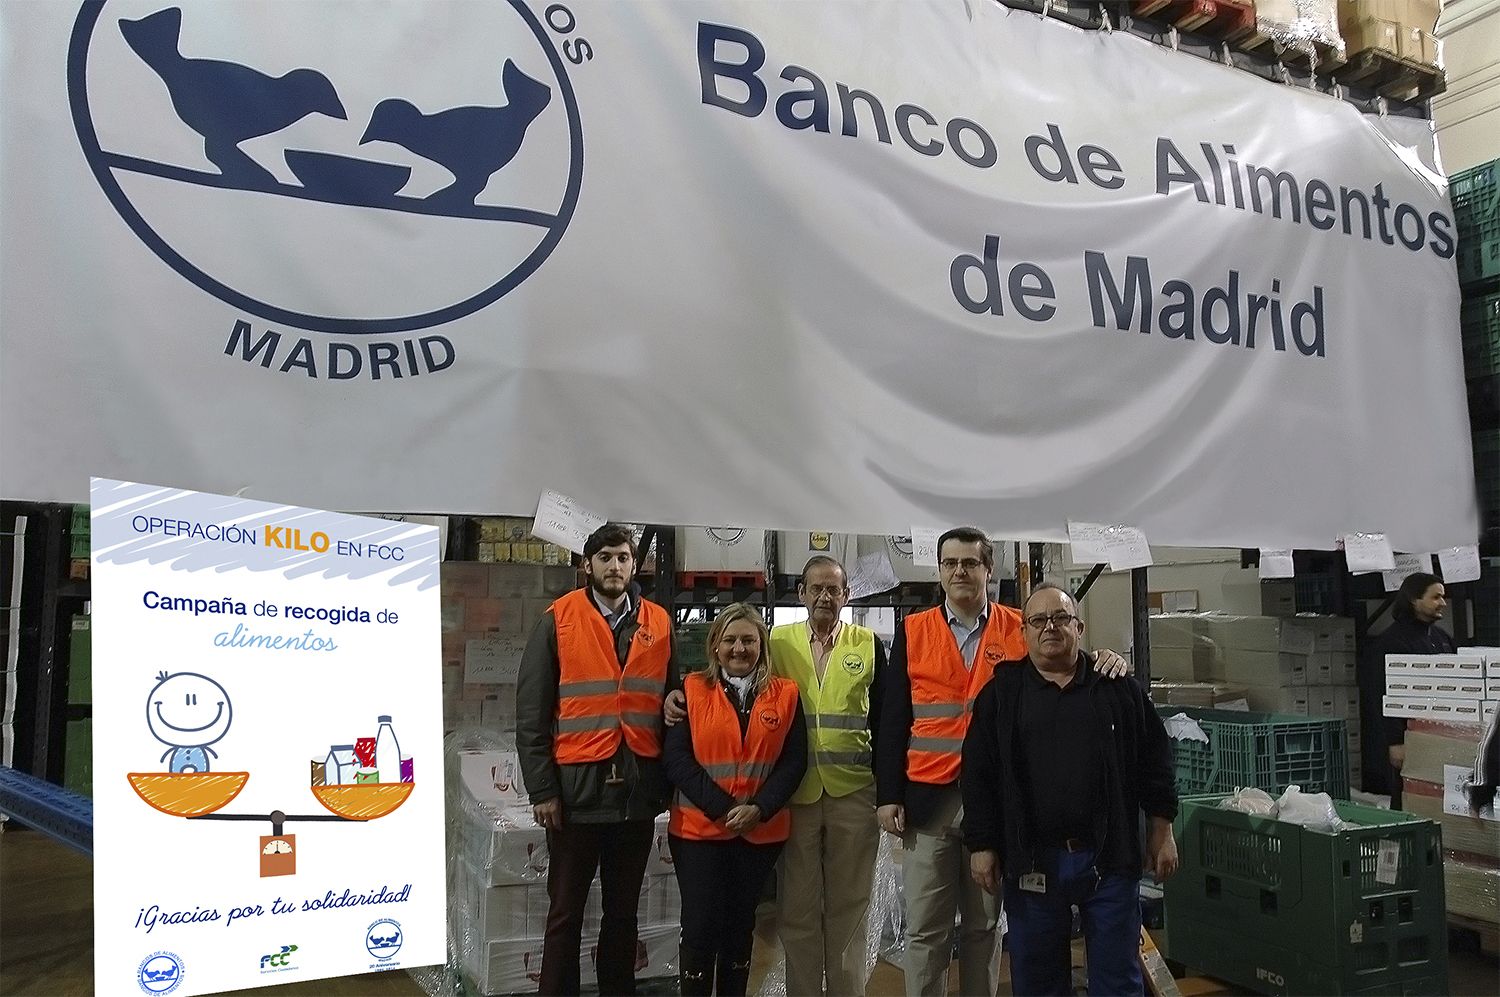 FCC donates more than 15 tonnes of food and other essential products to the Banco de Alimentos